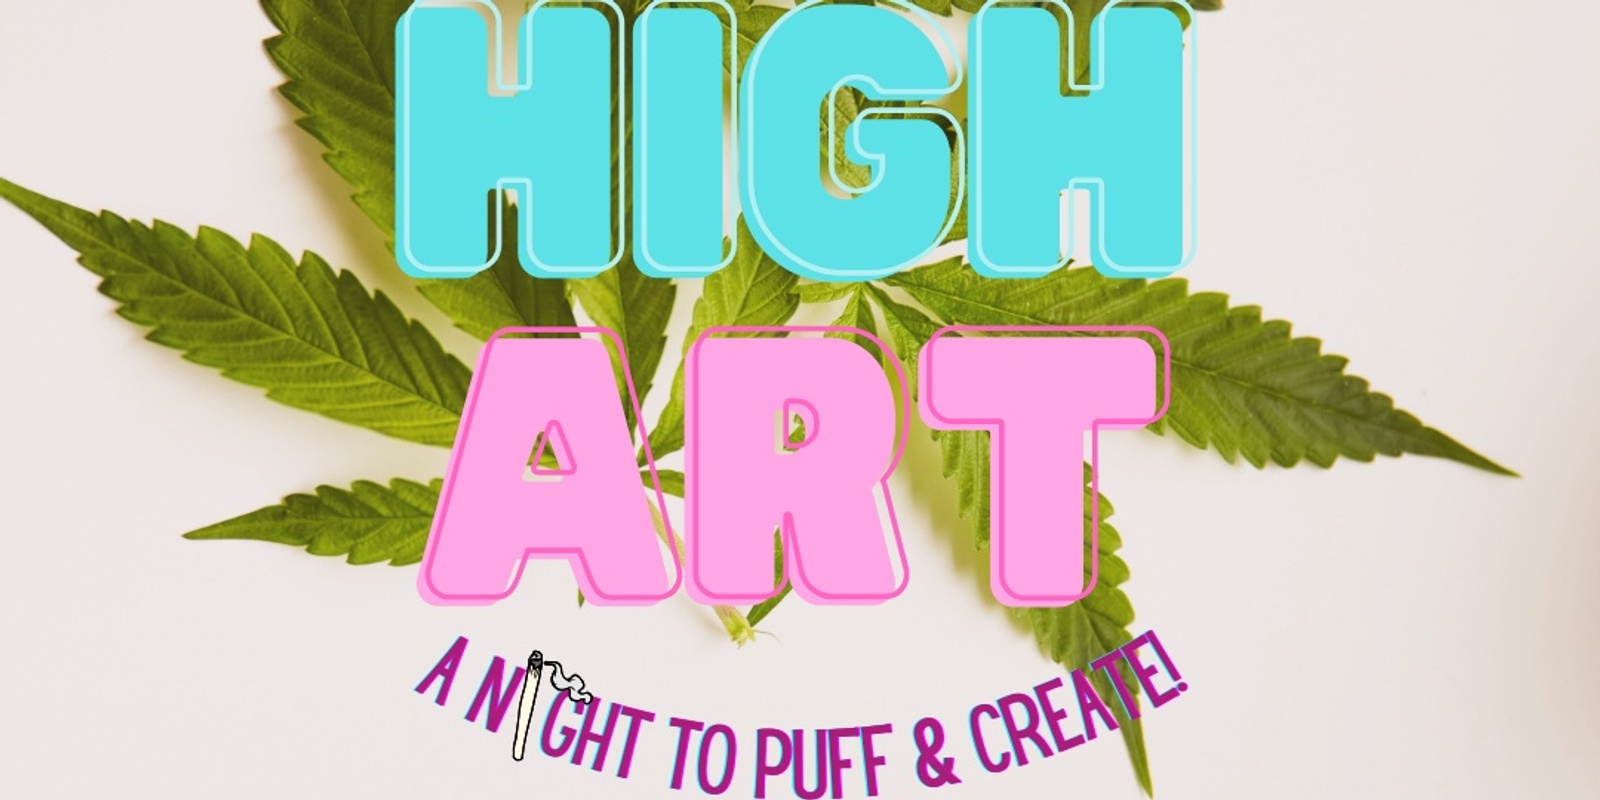 Banner image for High Art: A Night To Puff & Create